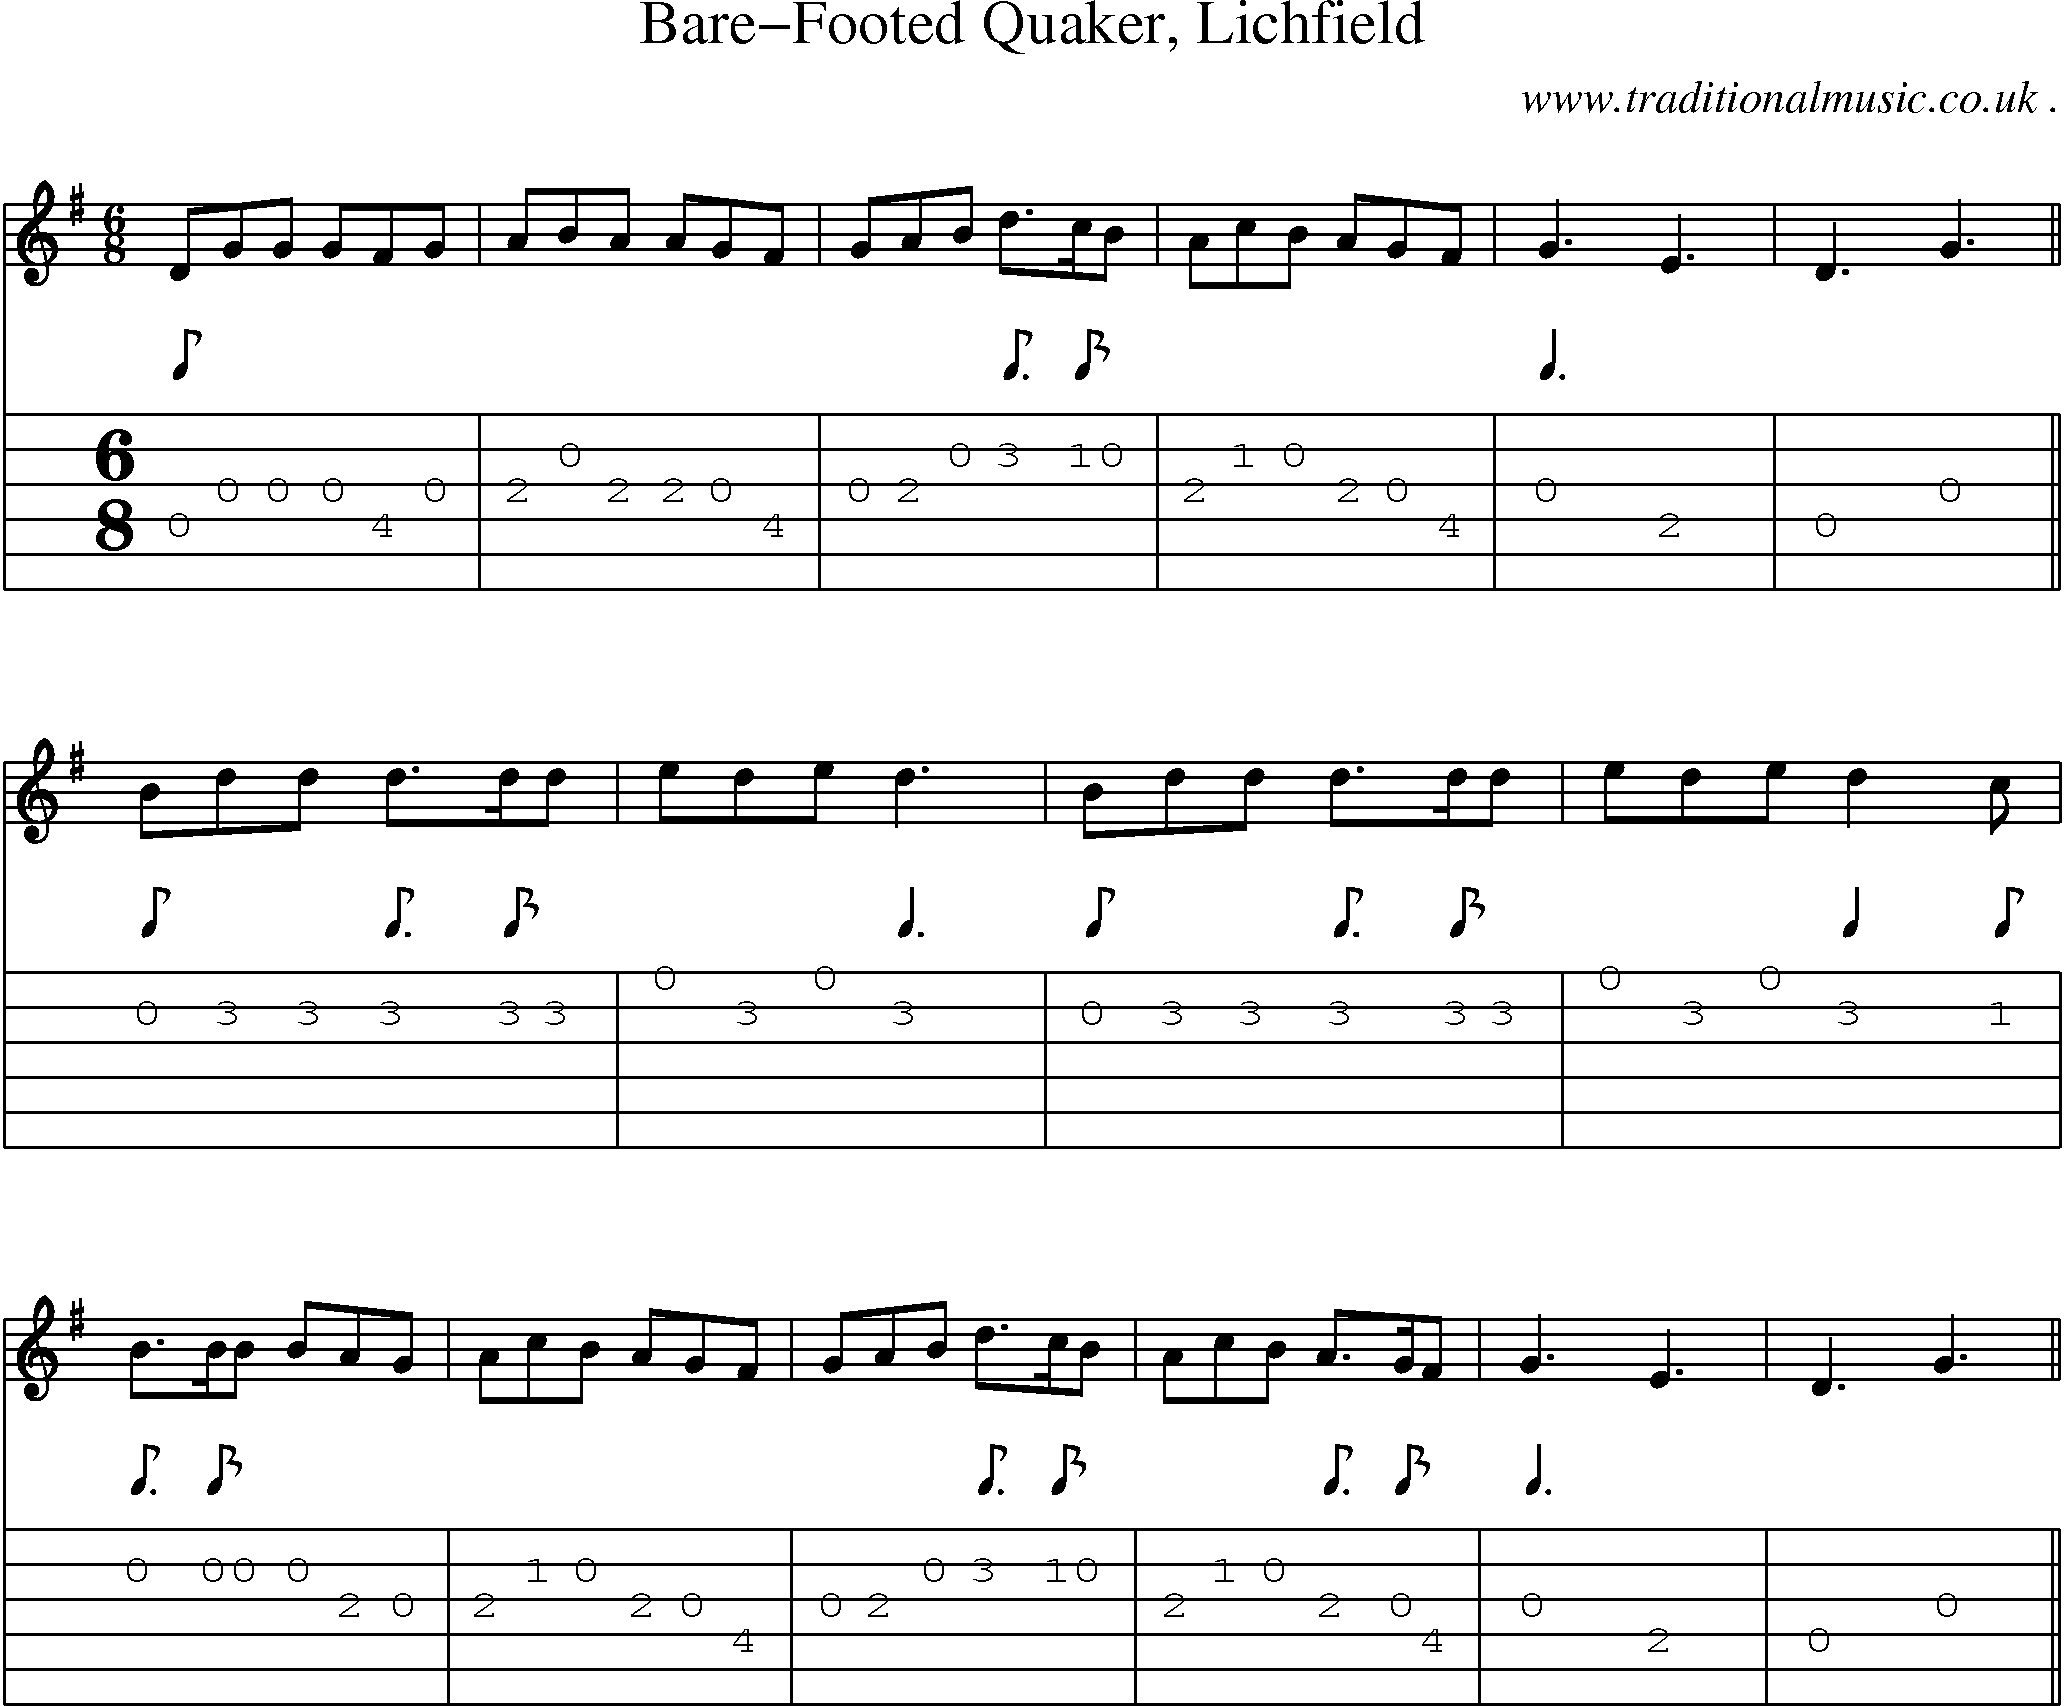 Sheet-Music and Guitar Tabs for Bare-footed Quaker Lichfield